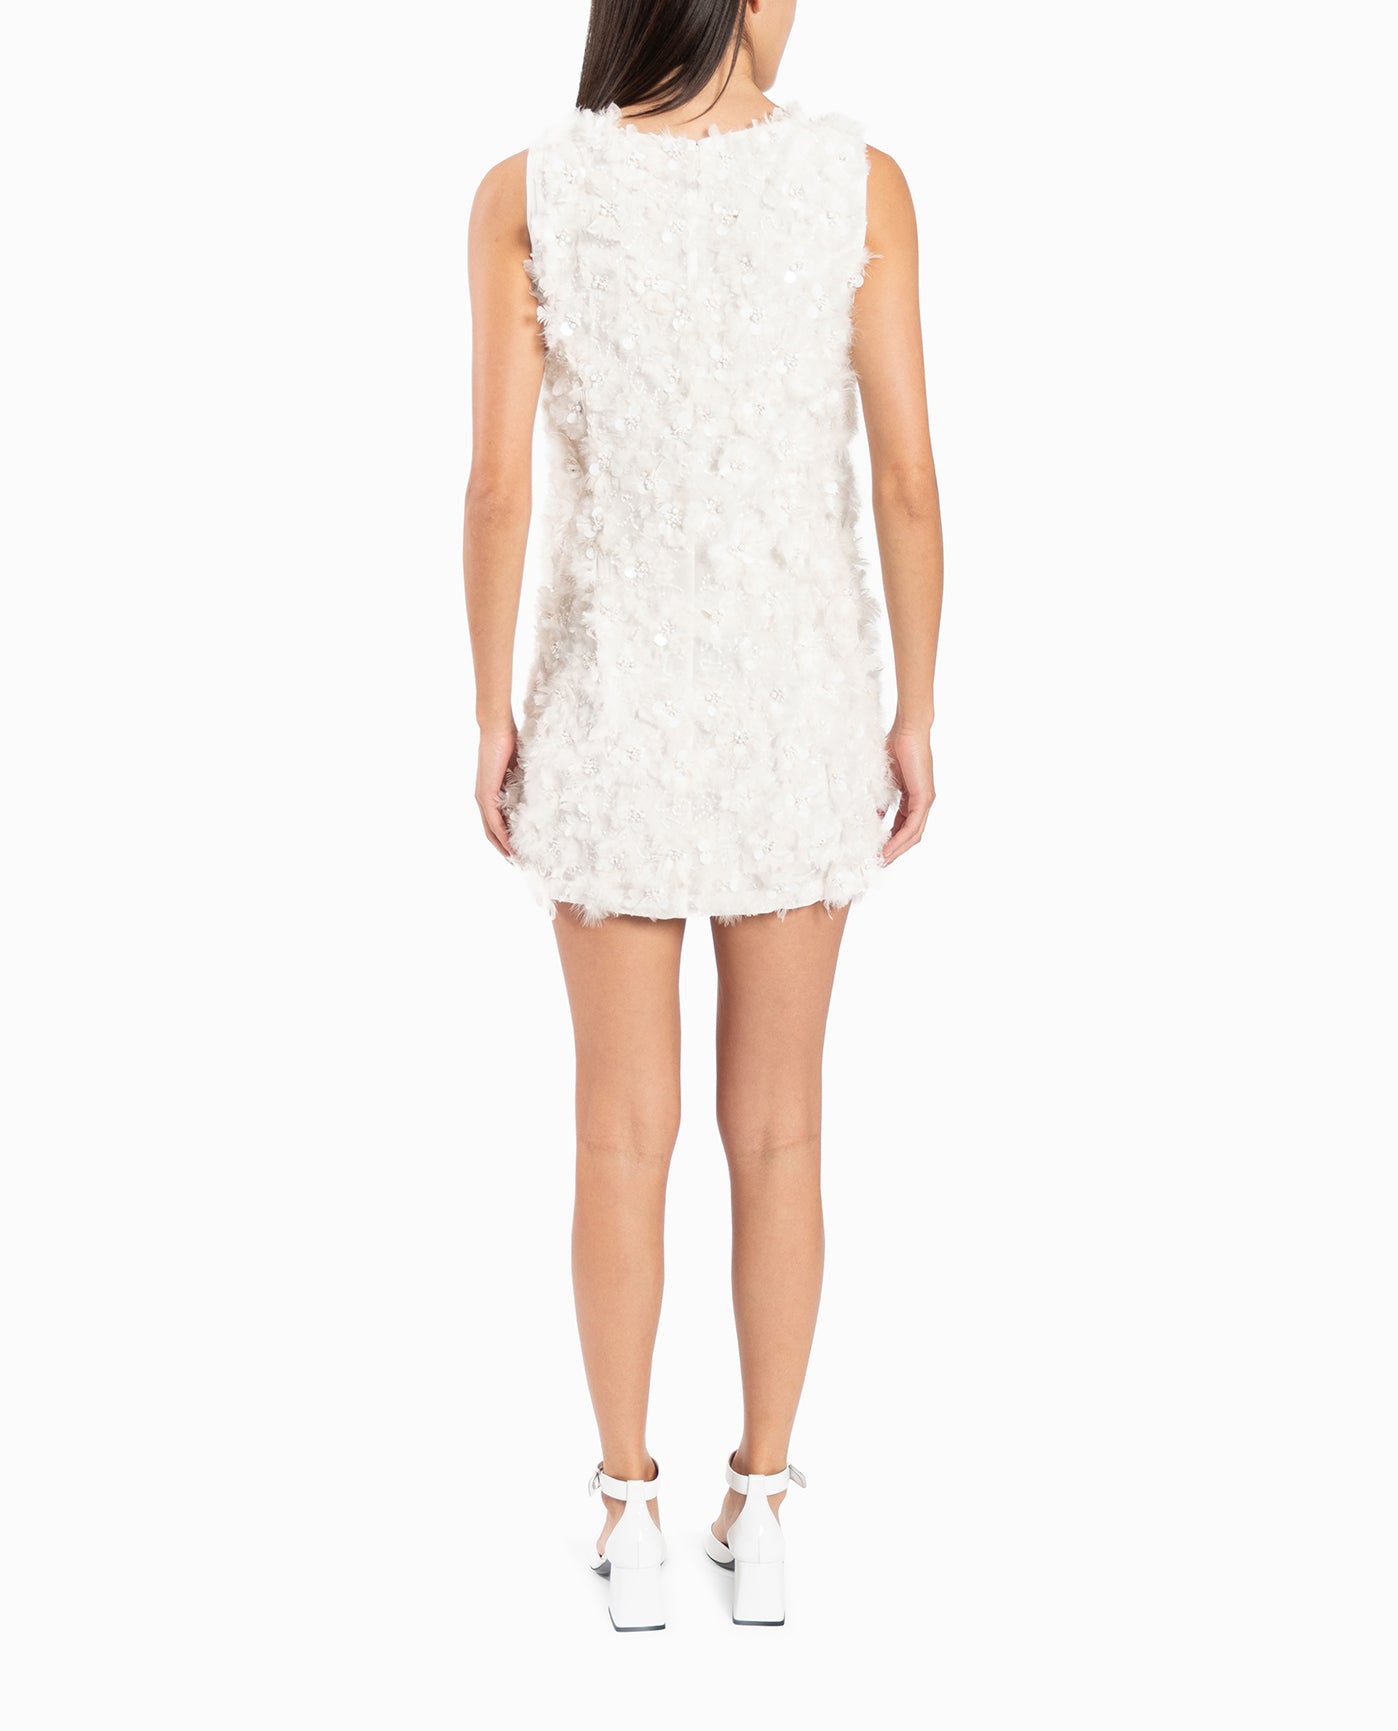 BACK OF FEATHERED FLORAL SHIFT DRESS | White Feather